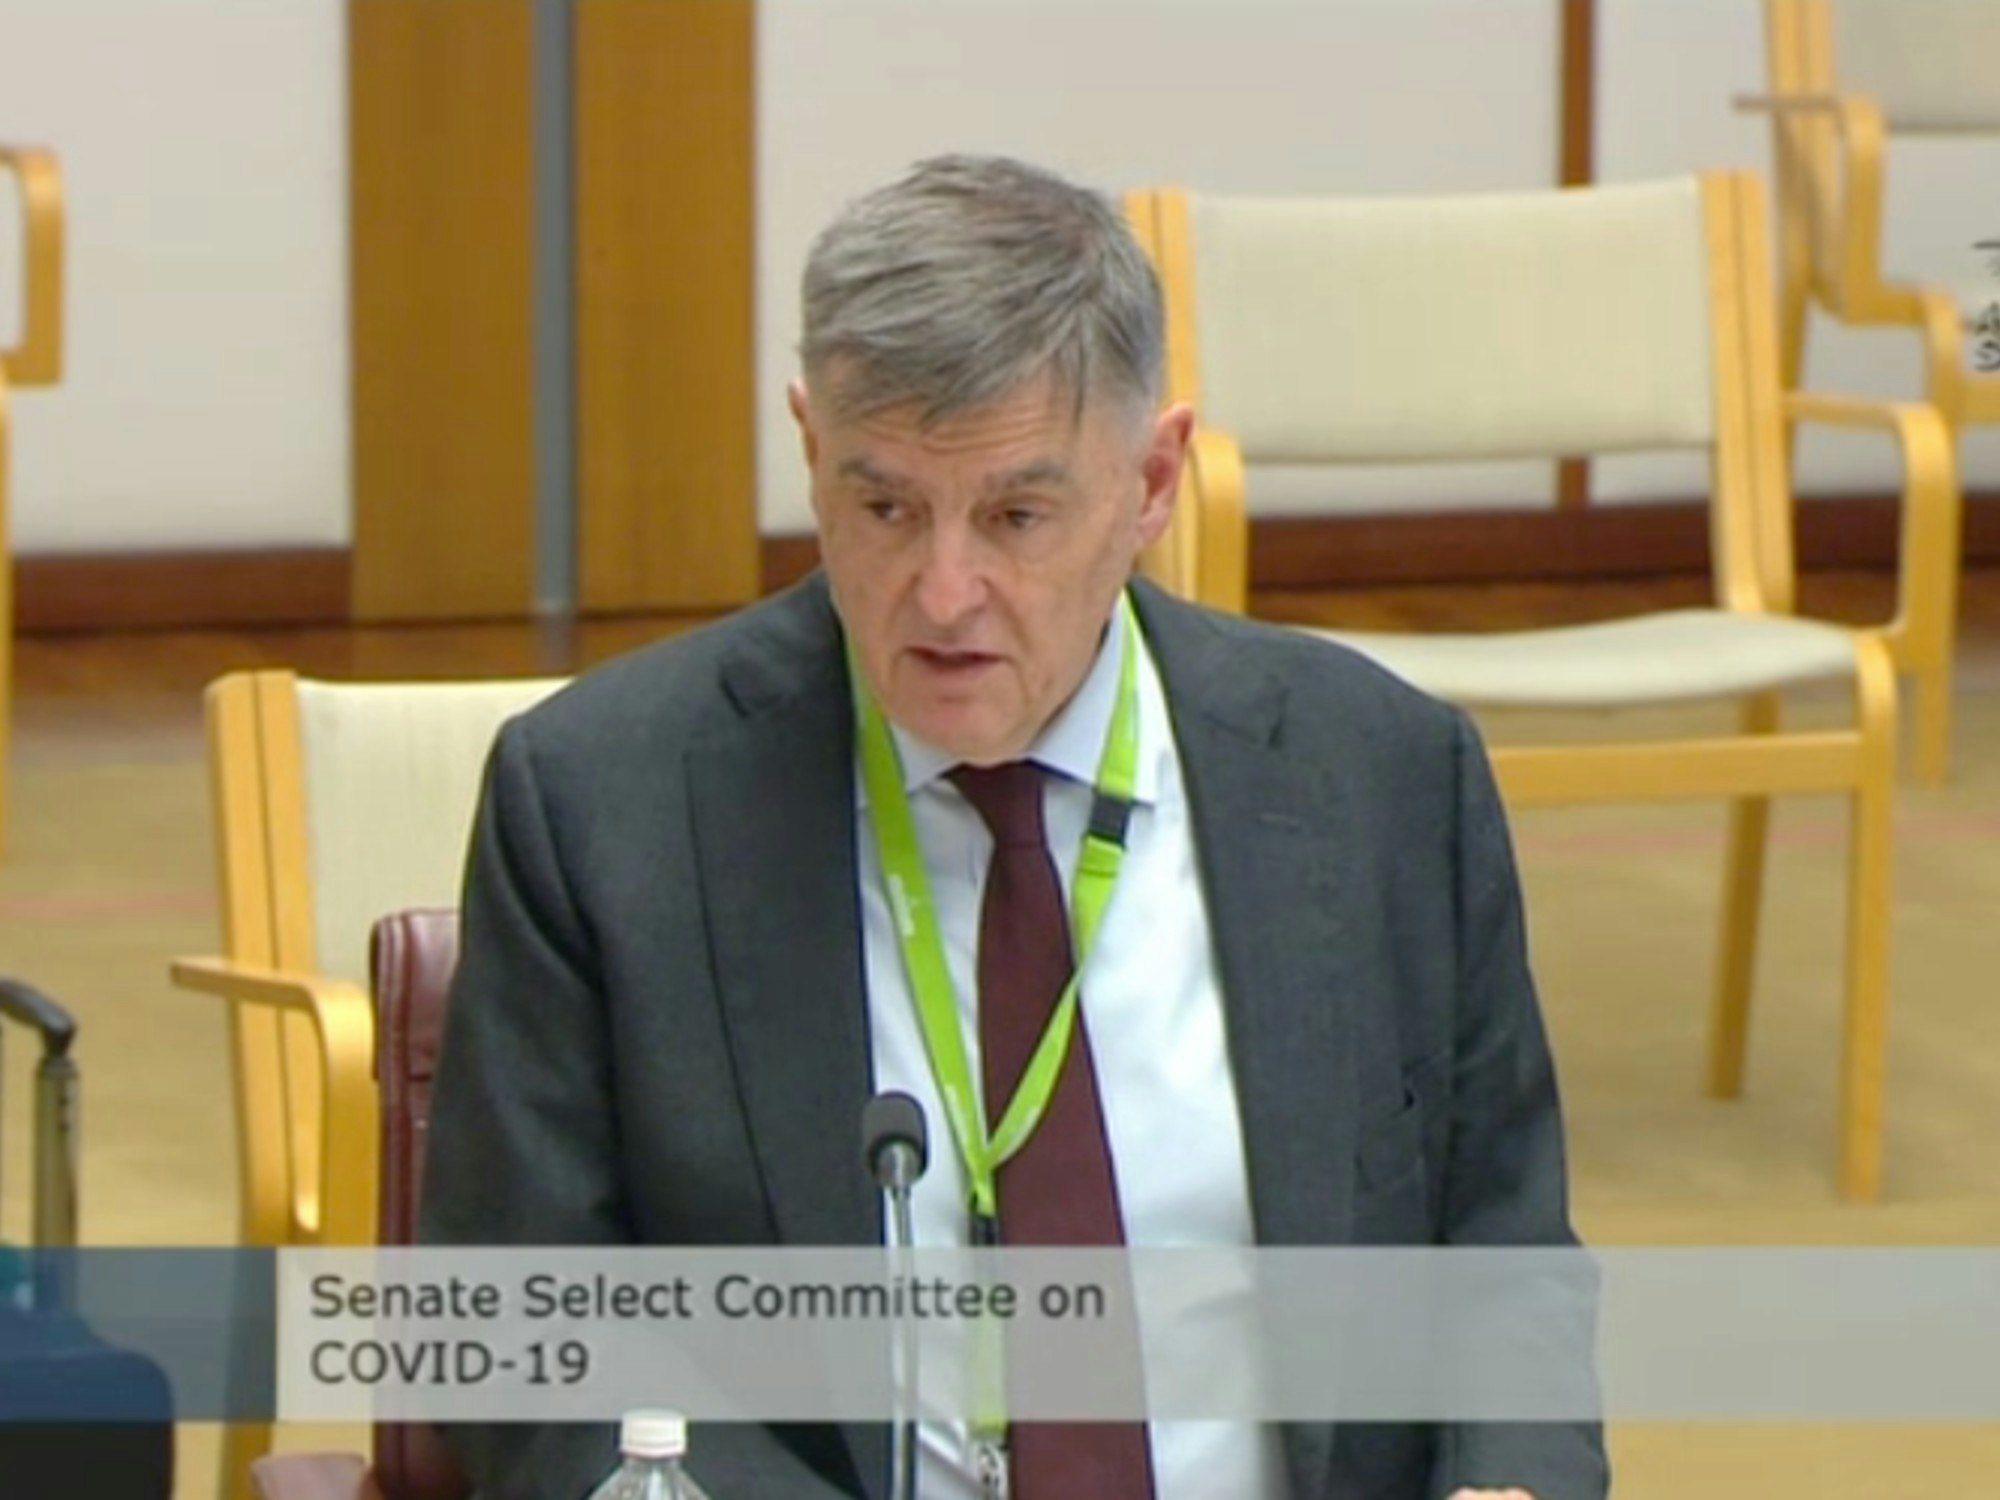 <p>The Department of Health admitted that aged care residents were prioritised over disability residents during the initial COVID-19 vaccine rollout. [Source: Senate Committee]</p>
